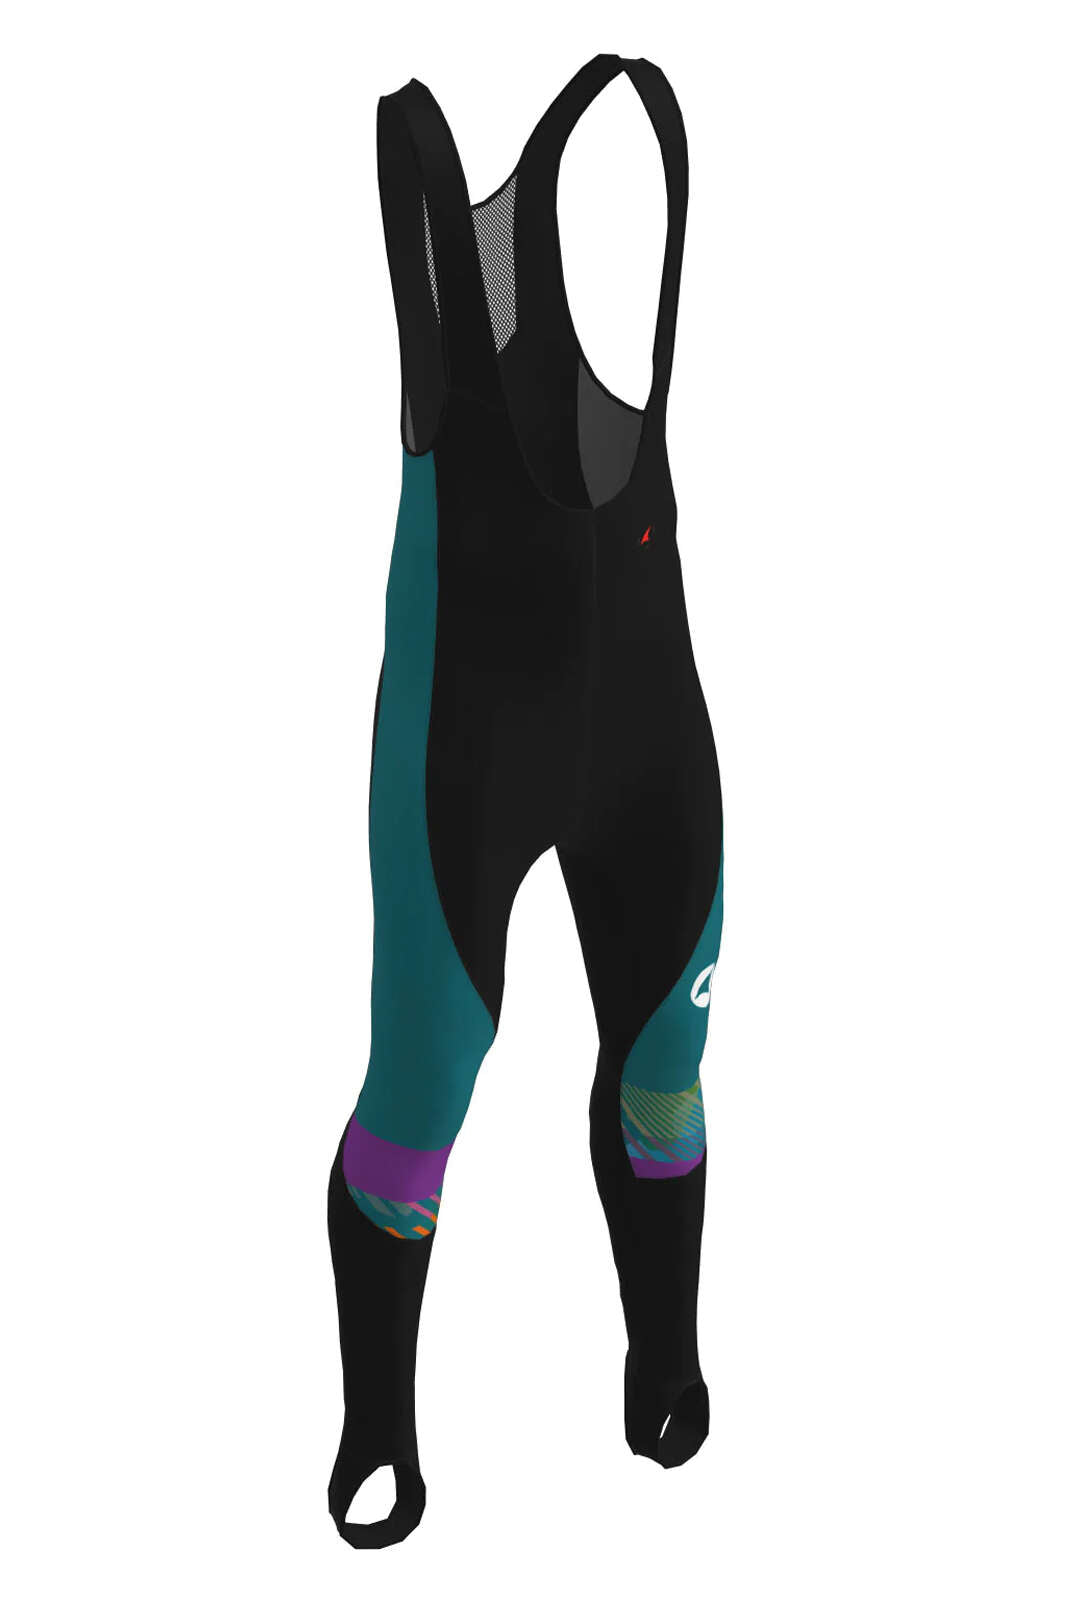 Men's Custom Thermal Bib Tights - Ouray Front View